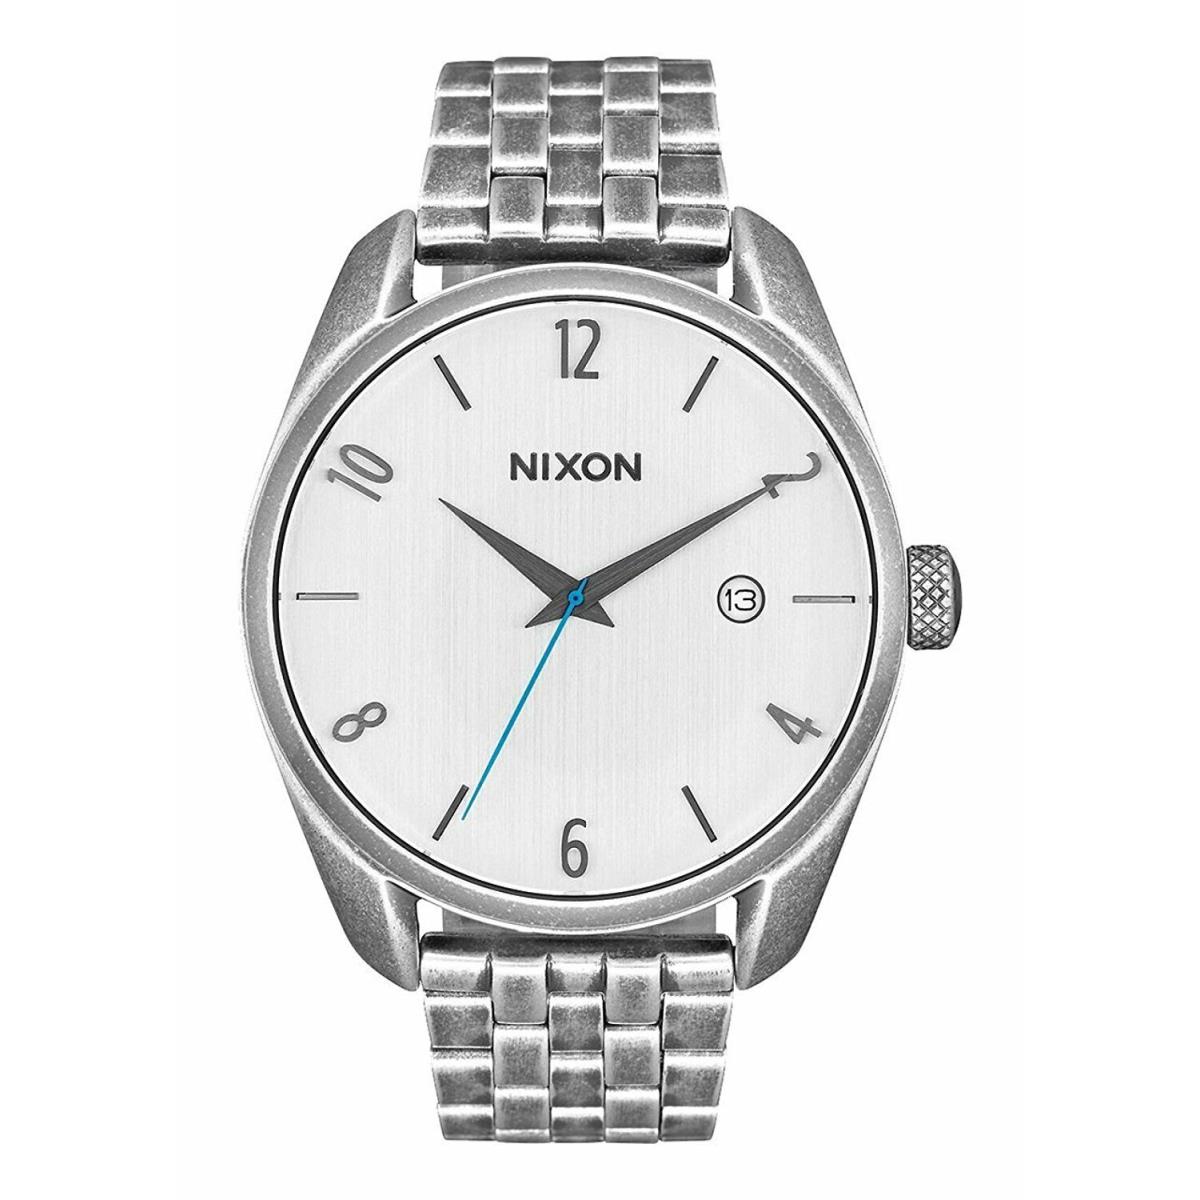 Nixon Bullet Silver / Antique Look Watch A418 2701 / A418-2701 / A4182701 - Silver Dial, Silver Band